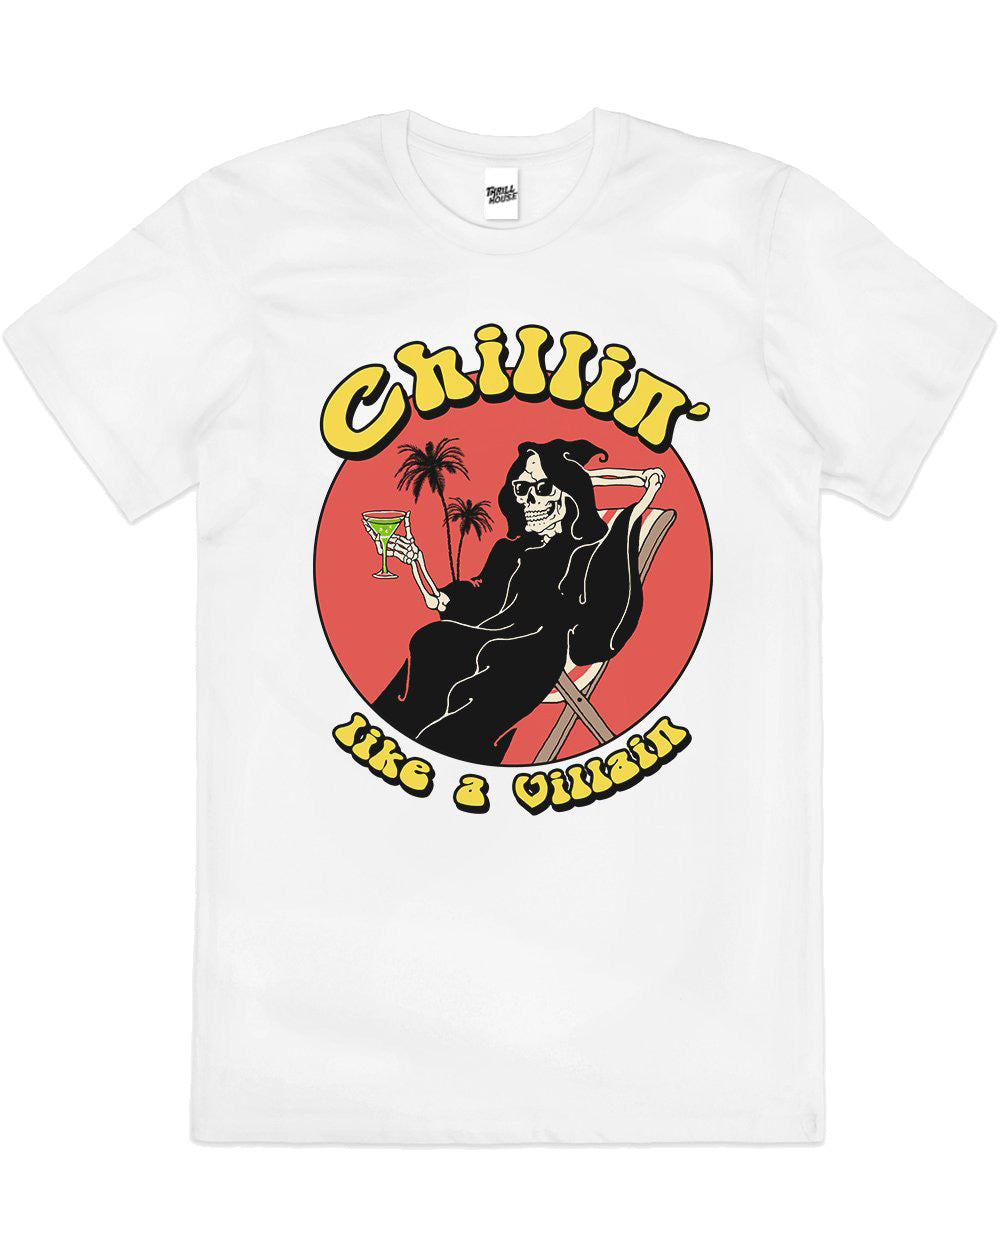 Chillin Like a Villain Funny Slogan Grim Reaper Chill Holiday Vacation Party Dark Humour Cotton  T-Shirt